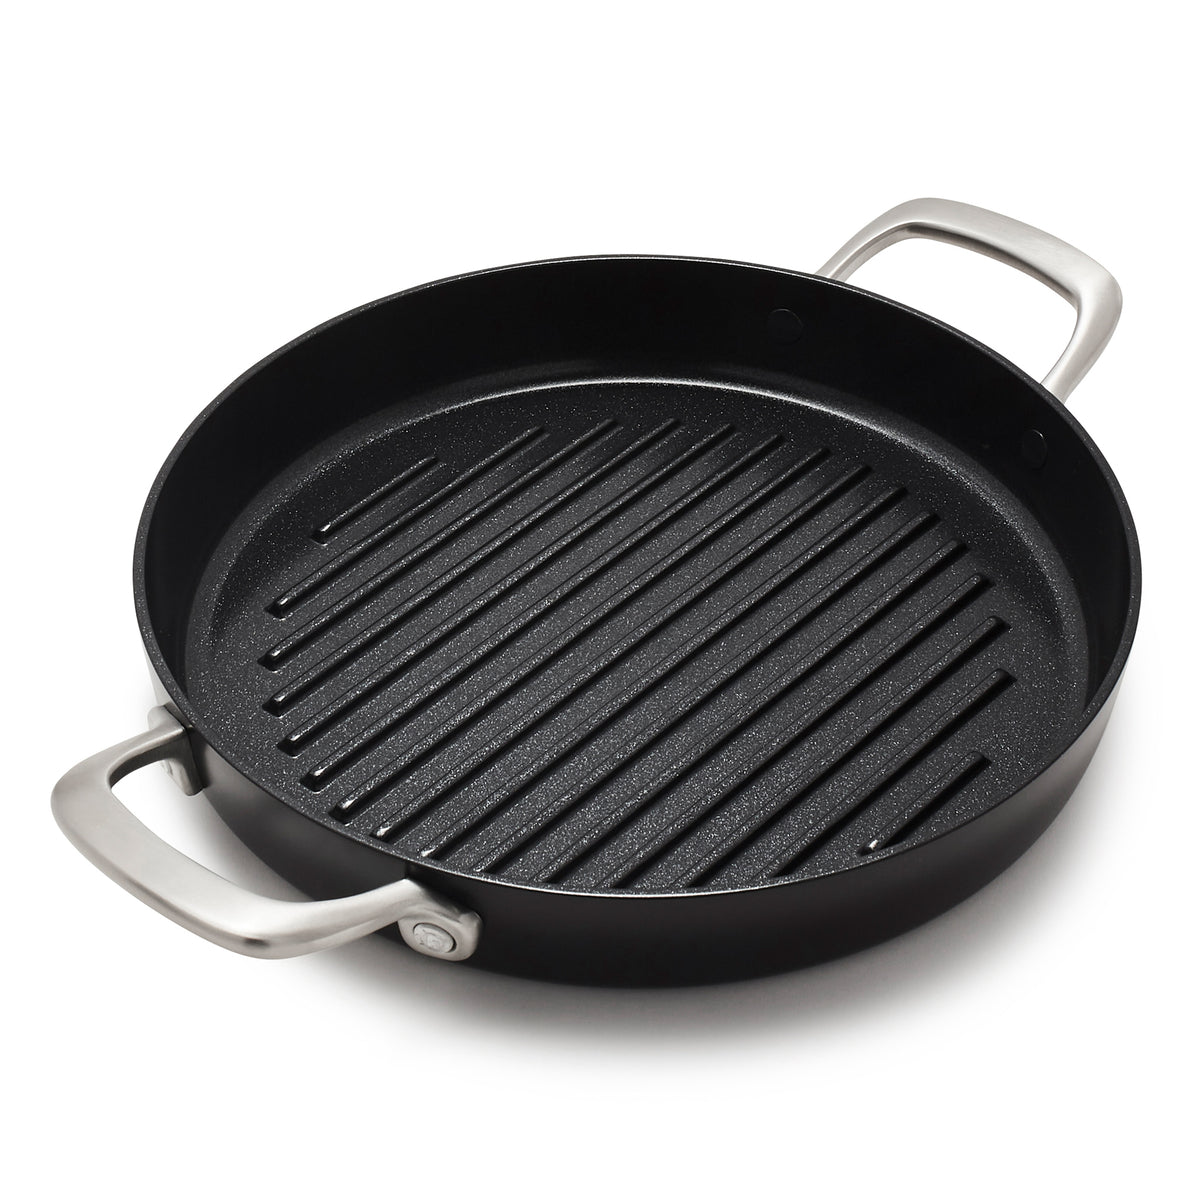 Carote 11-Inch Grill Pan $54